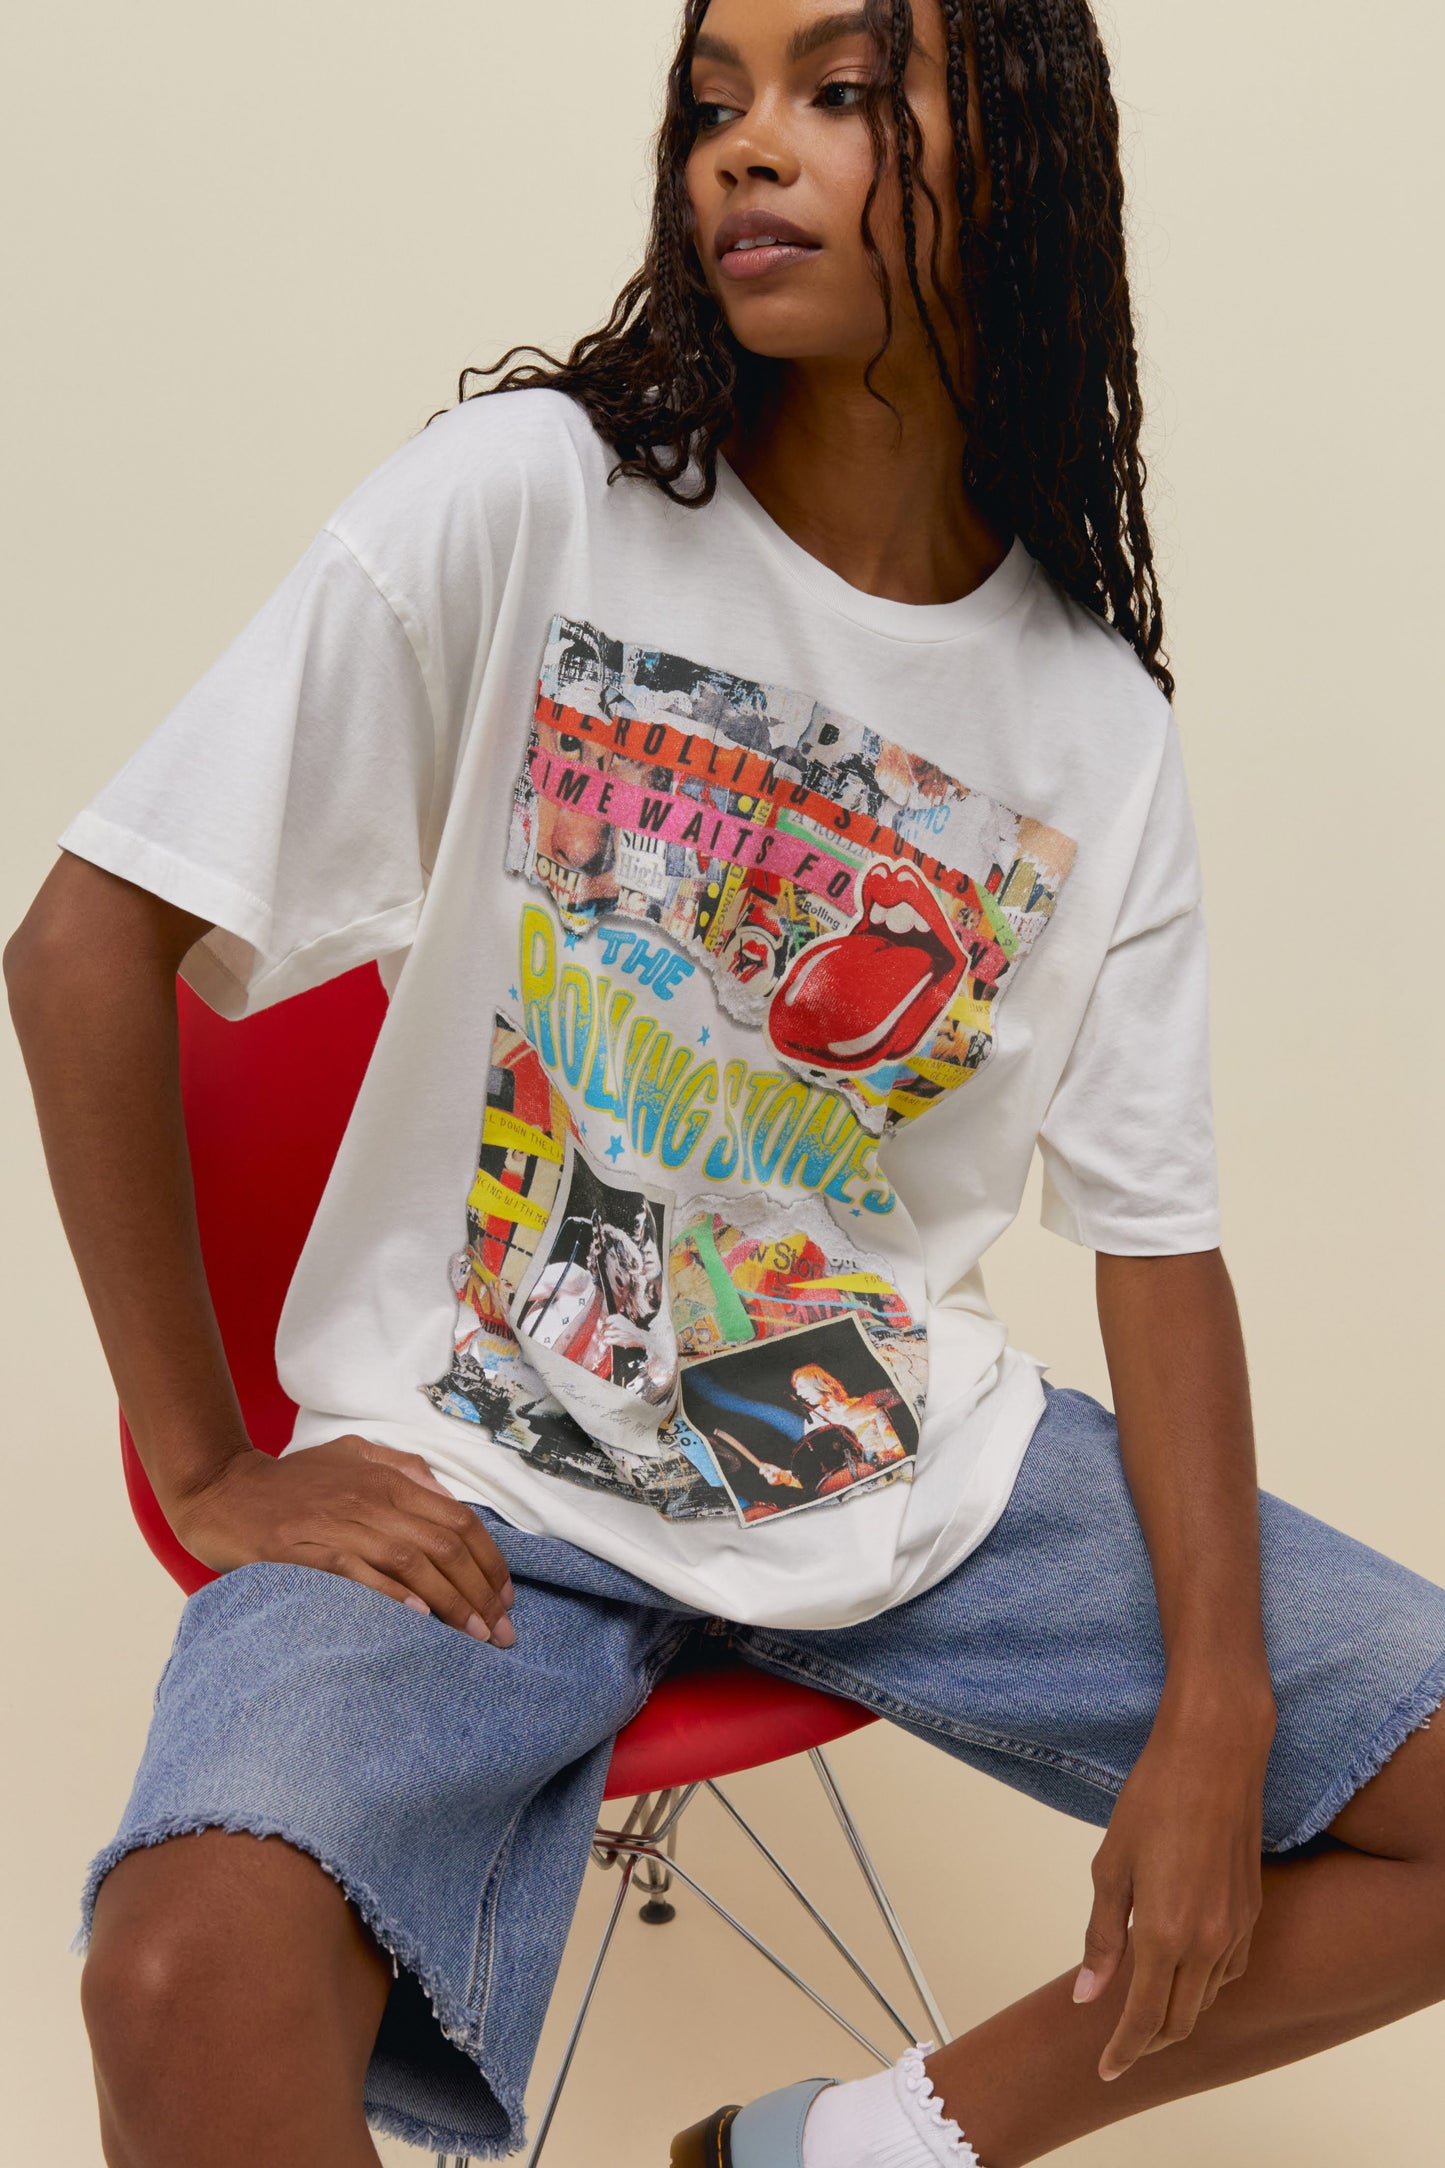 A model featuring a white tee stamped with 'The Rolling Stones' wiith collage pictures of the band performing at concerts.